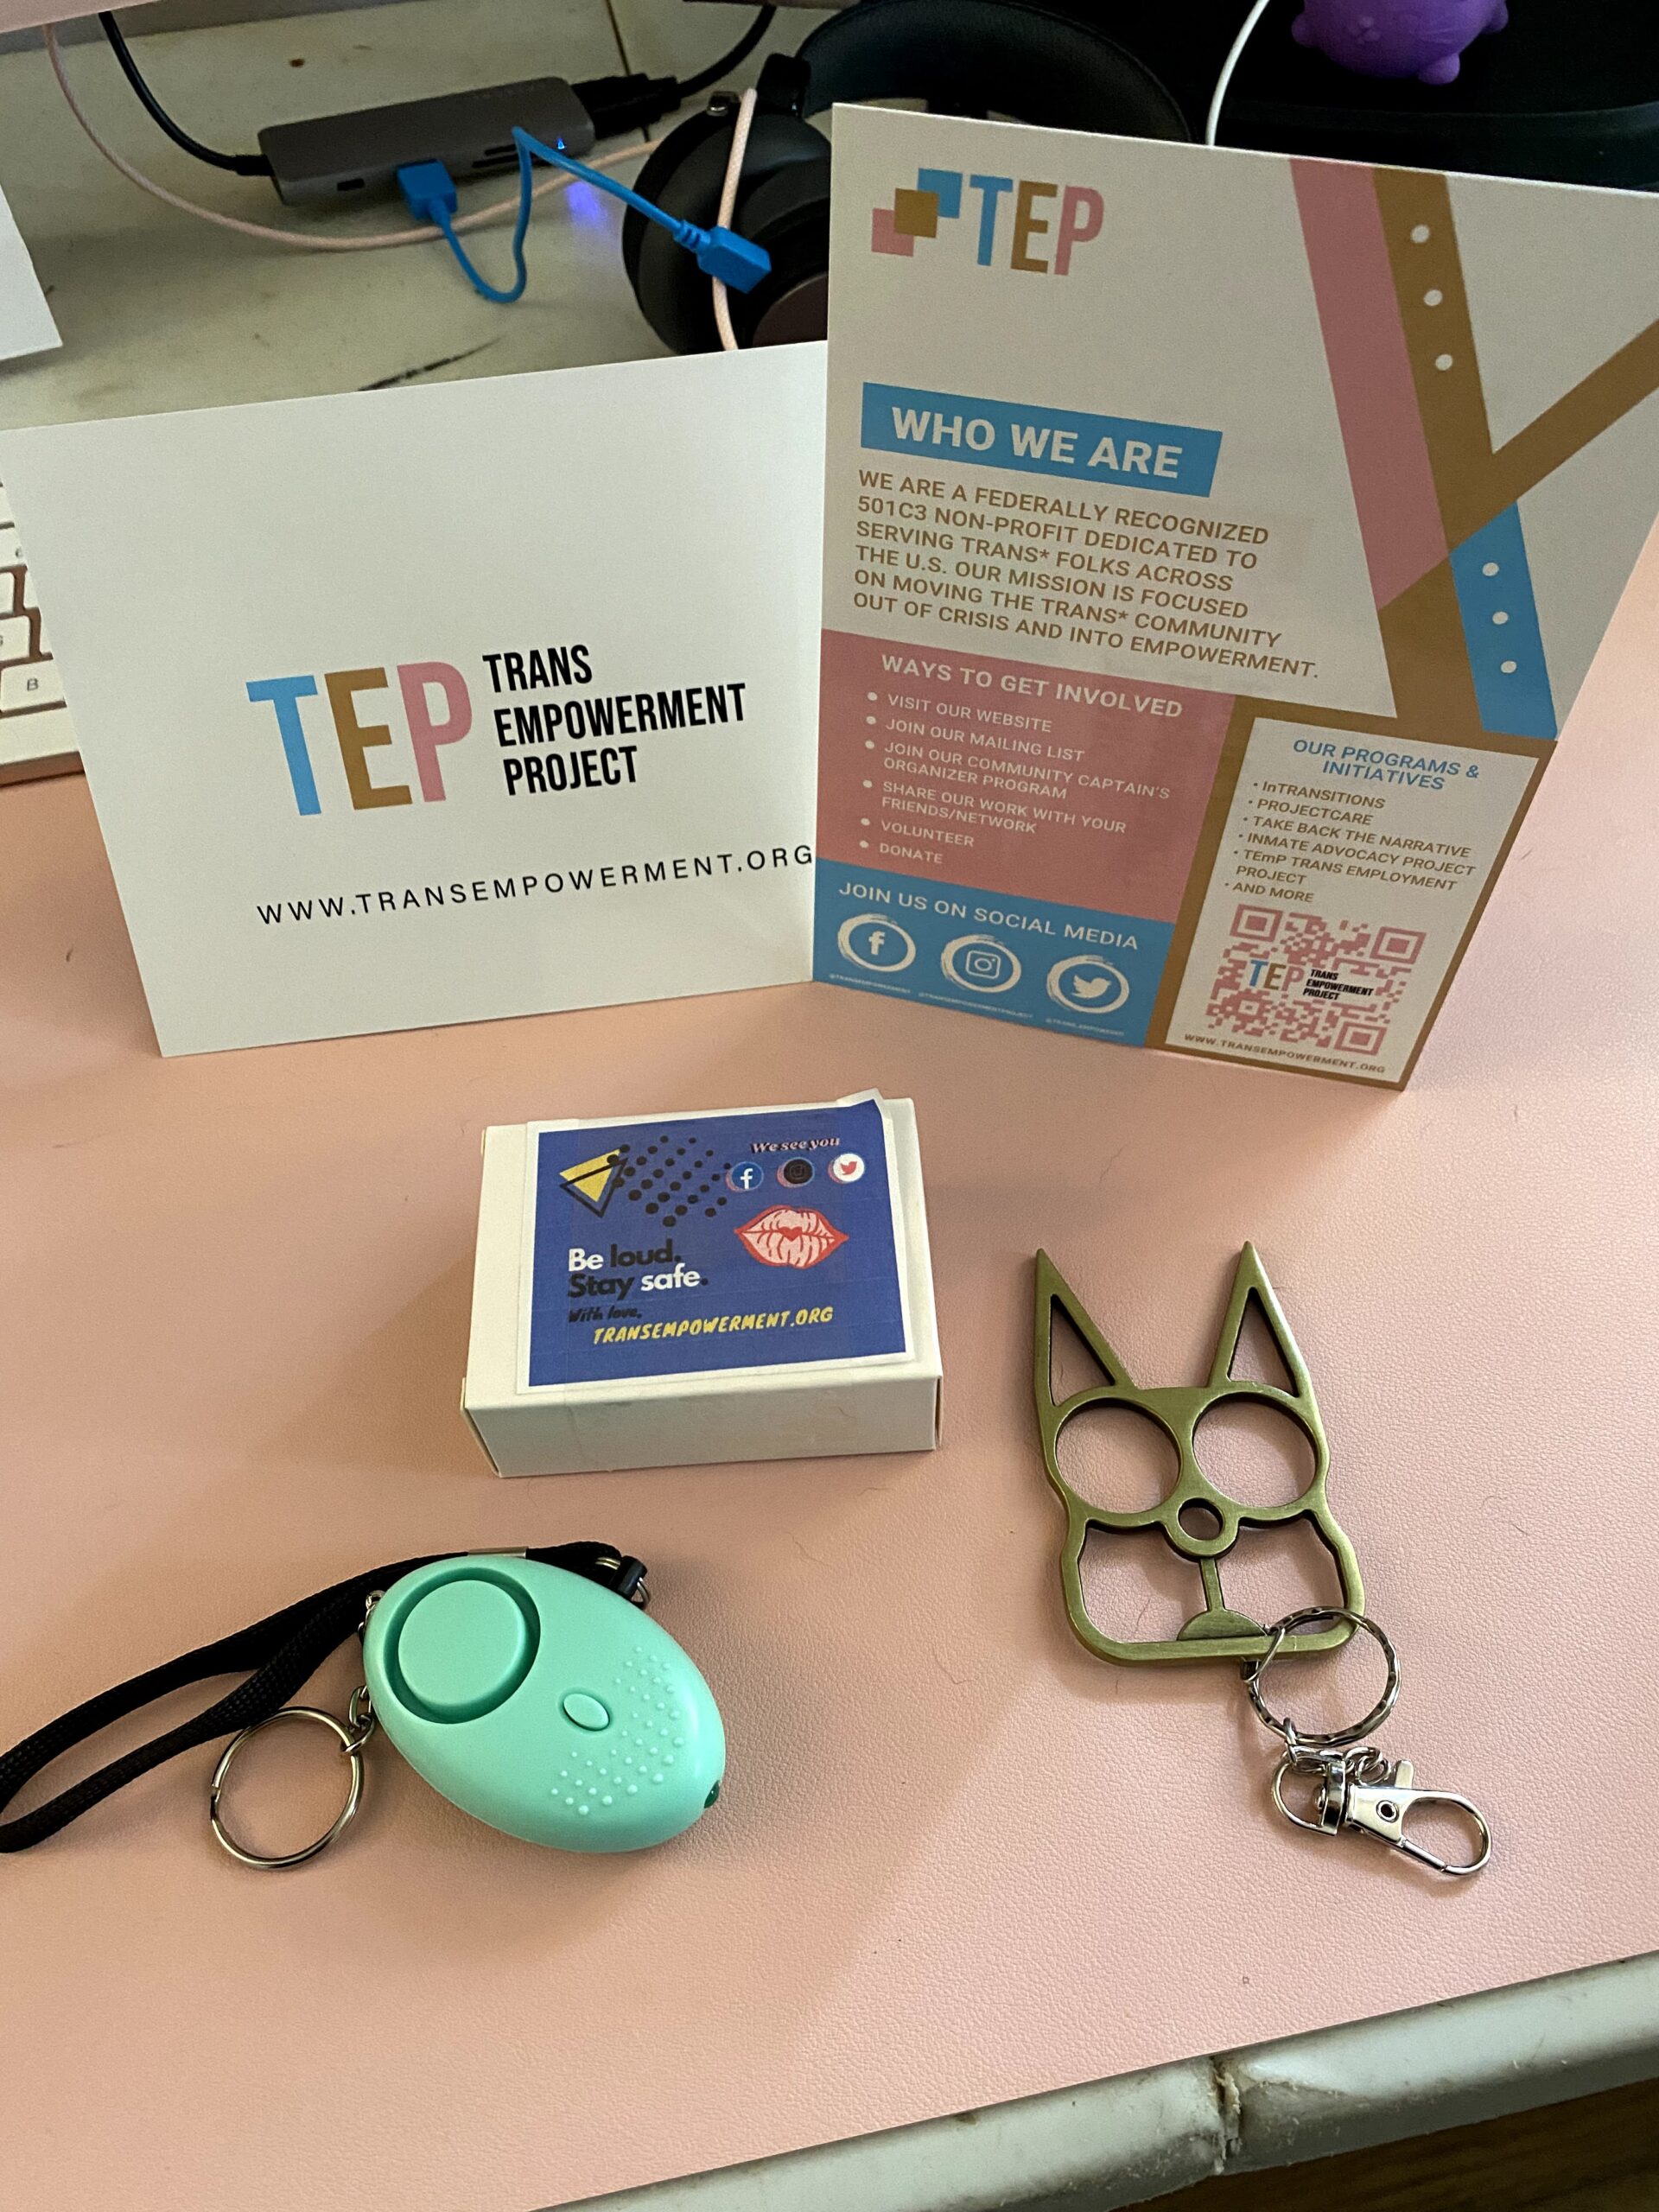 3-4 items from TEP's safety kit project are on display. These items were distributed in 2021